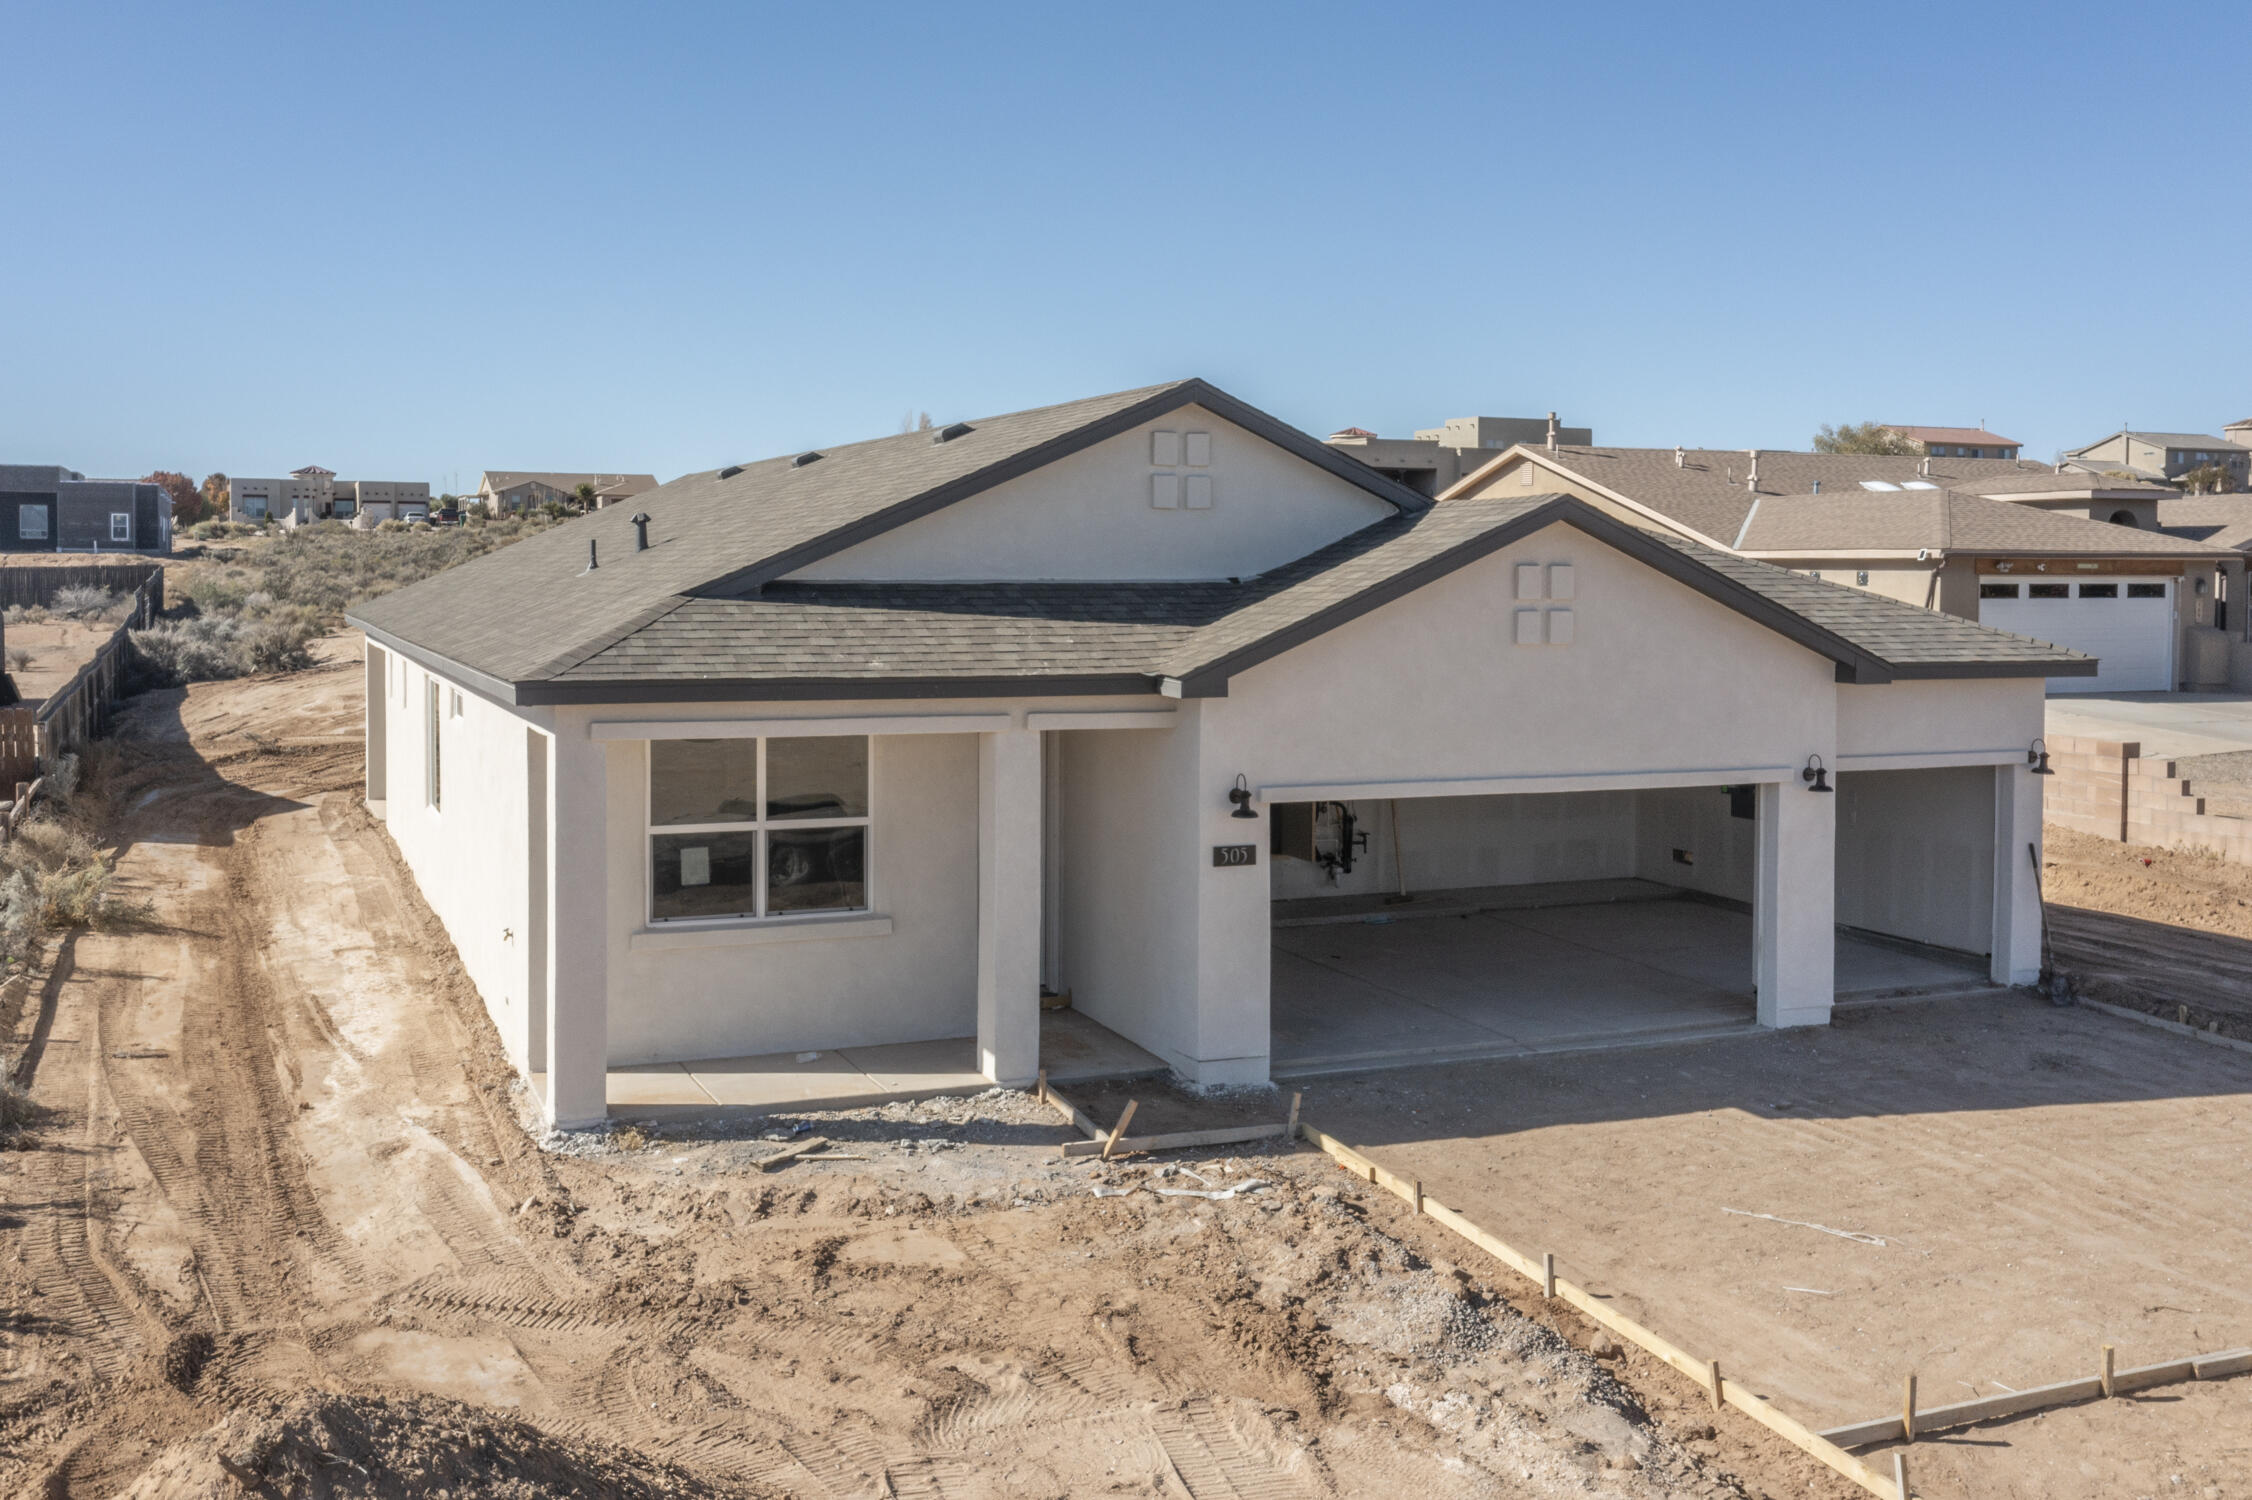 BE SURE TO ASK ABOUT BUILDER INCENTIVES. Welcome to 505 4th St in Rio Rancho. This is the San Juan floorplan built by Amreston Homes. This 3-bedroom 2.5 bath home has 1651 sqft and a 3-car garage. Bring your toys to enjoy on this .5-acre lot with no HOA. This home will have Kona-stained cabinets in all the standard locations as well as 12x24 tile in the wet areas. The shower surrounds will have 13x13'' tile up to the ceilings. The spacious owner's suite is 16.5x13 and will comfortably fit most any bedroom set. The kitchen will have granite standard with the sink and dishwasher located in the island. Some photos are not of the exact home, but rather examples of the floorplan and finish work of the builder. Finished product may vary based on material supply.